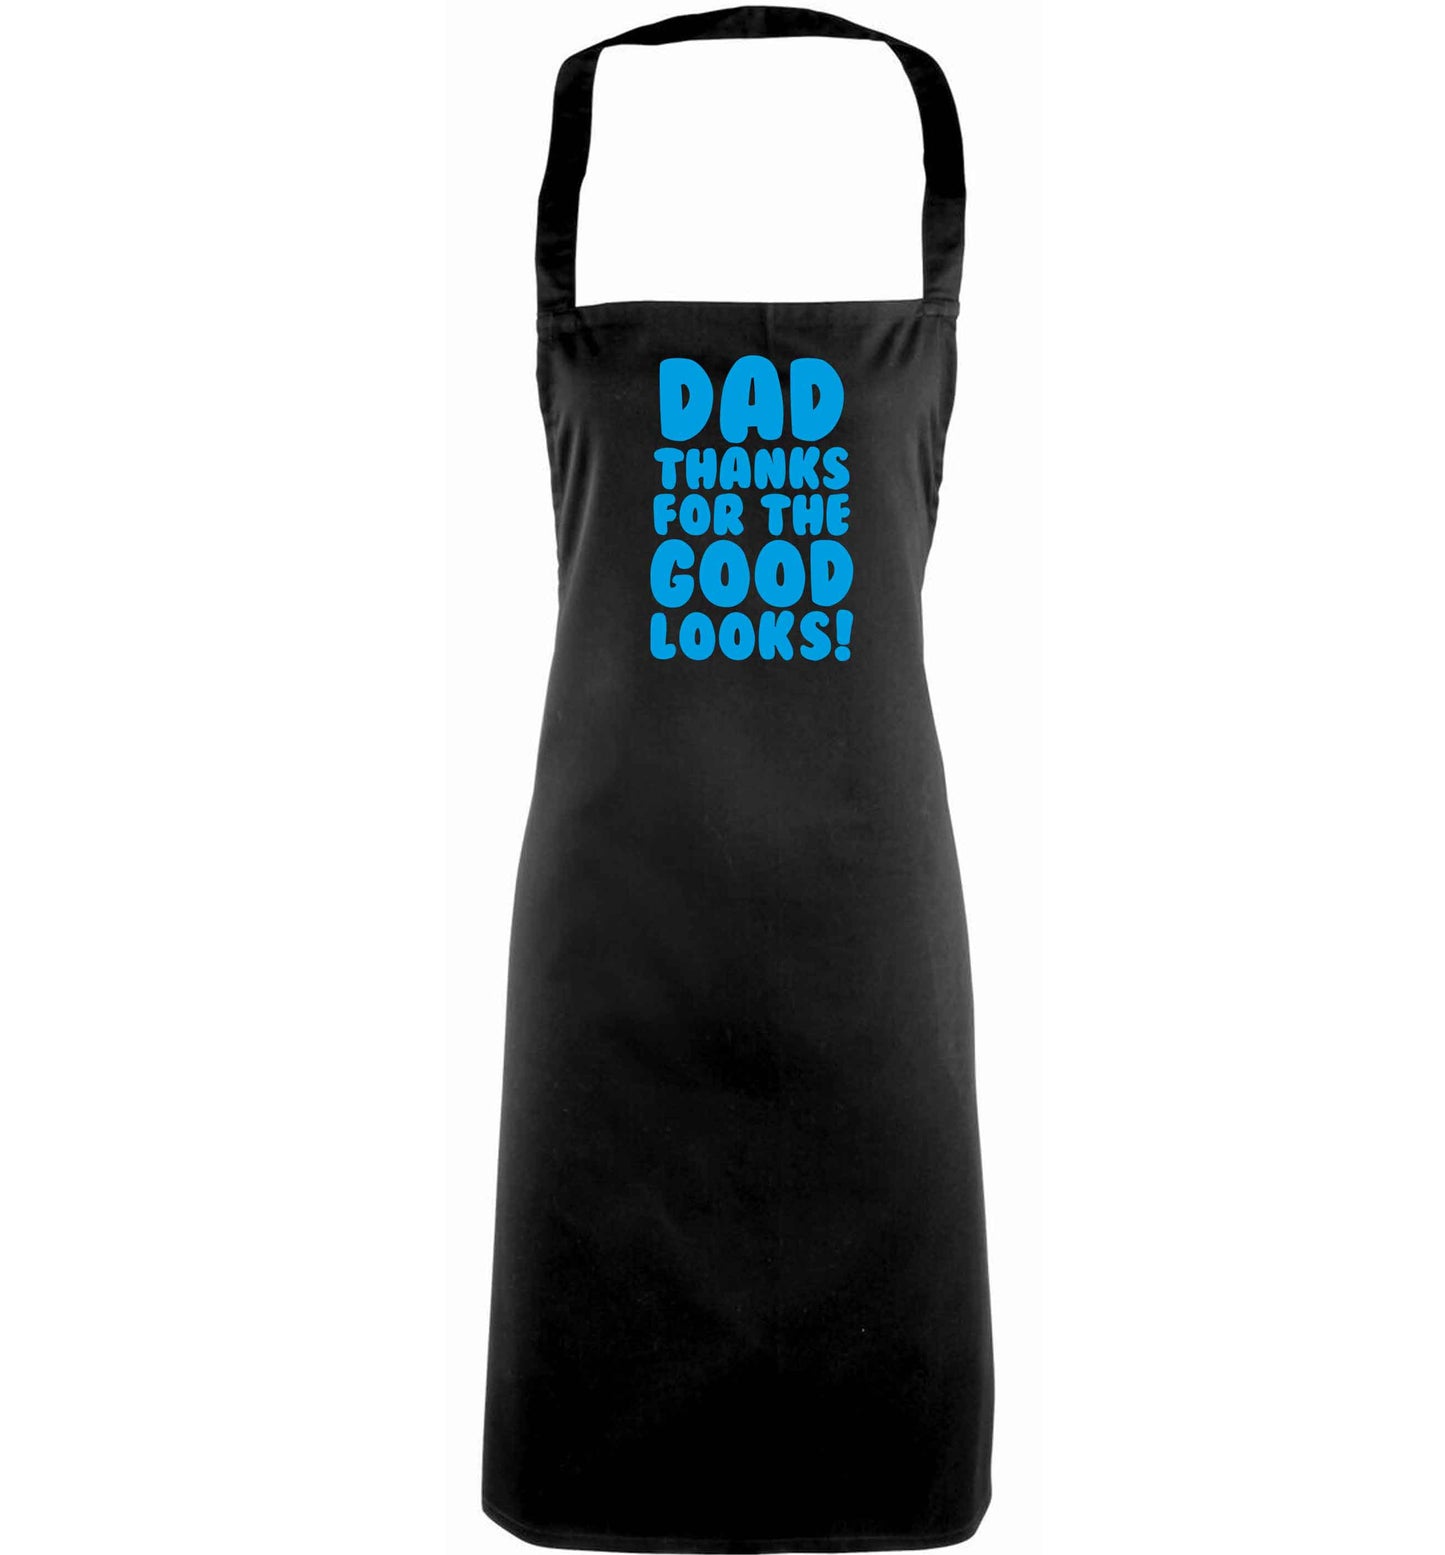 Dad thanks for the good looks adults black apron